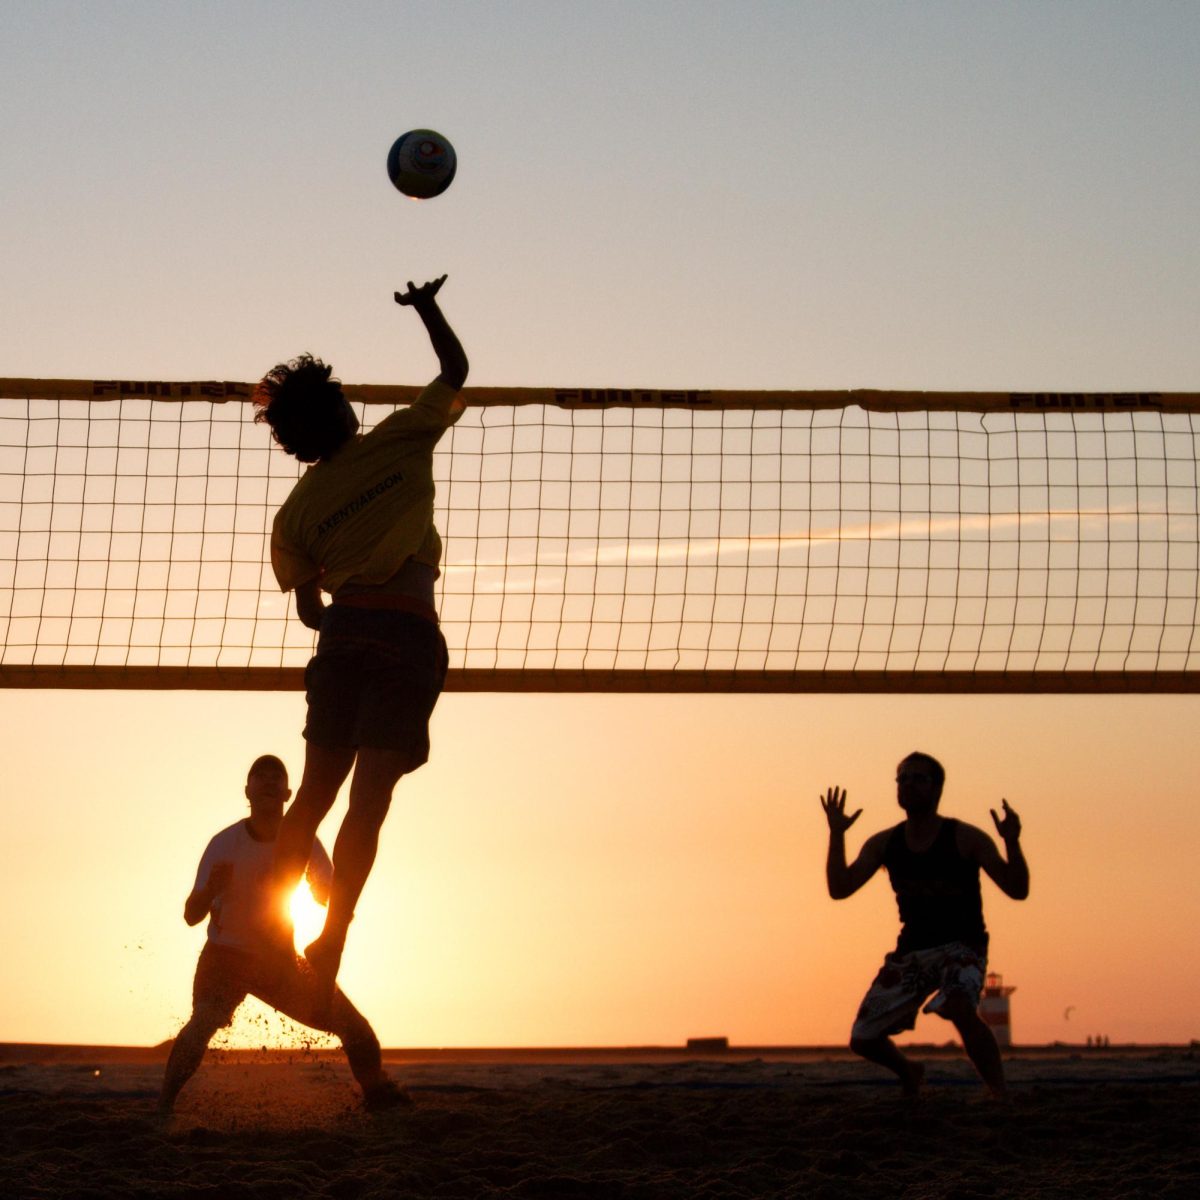 Three boys playing volleyball for fun on a beach with the sunset in the background.